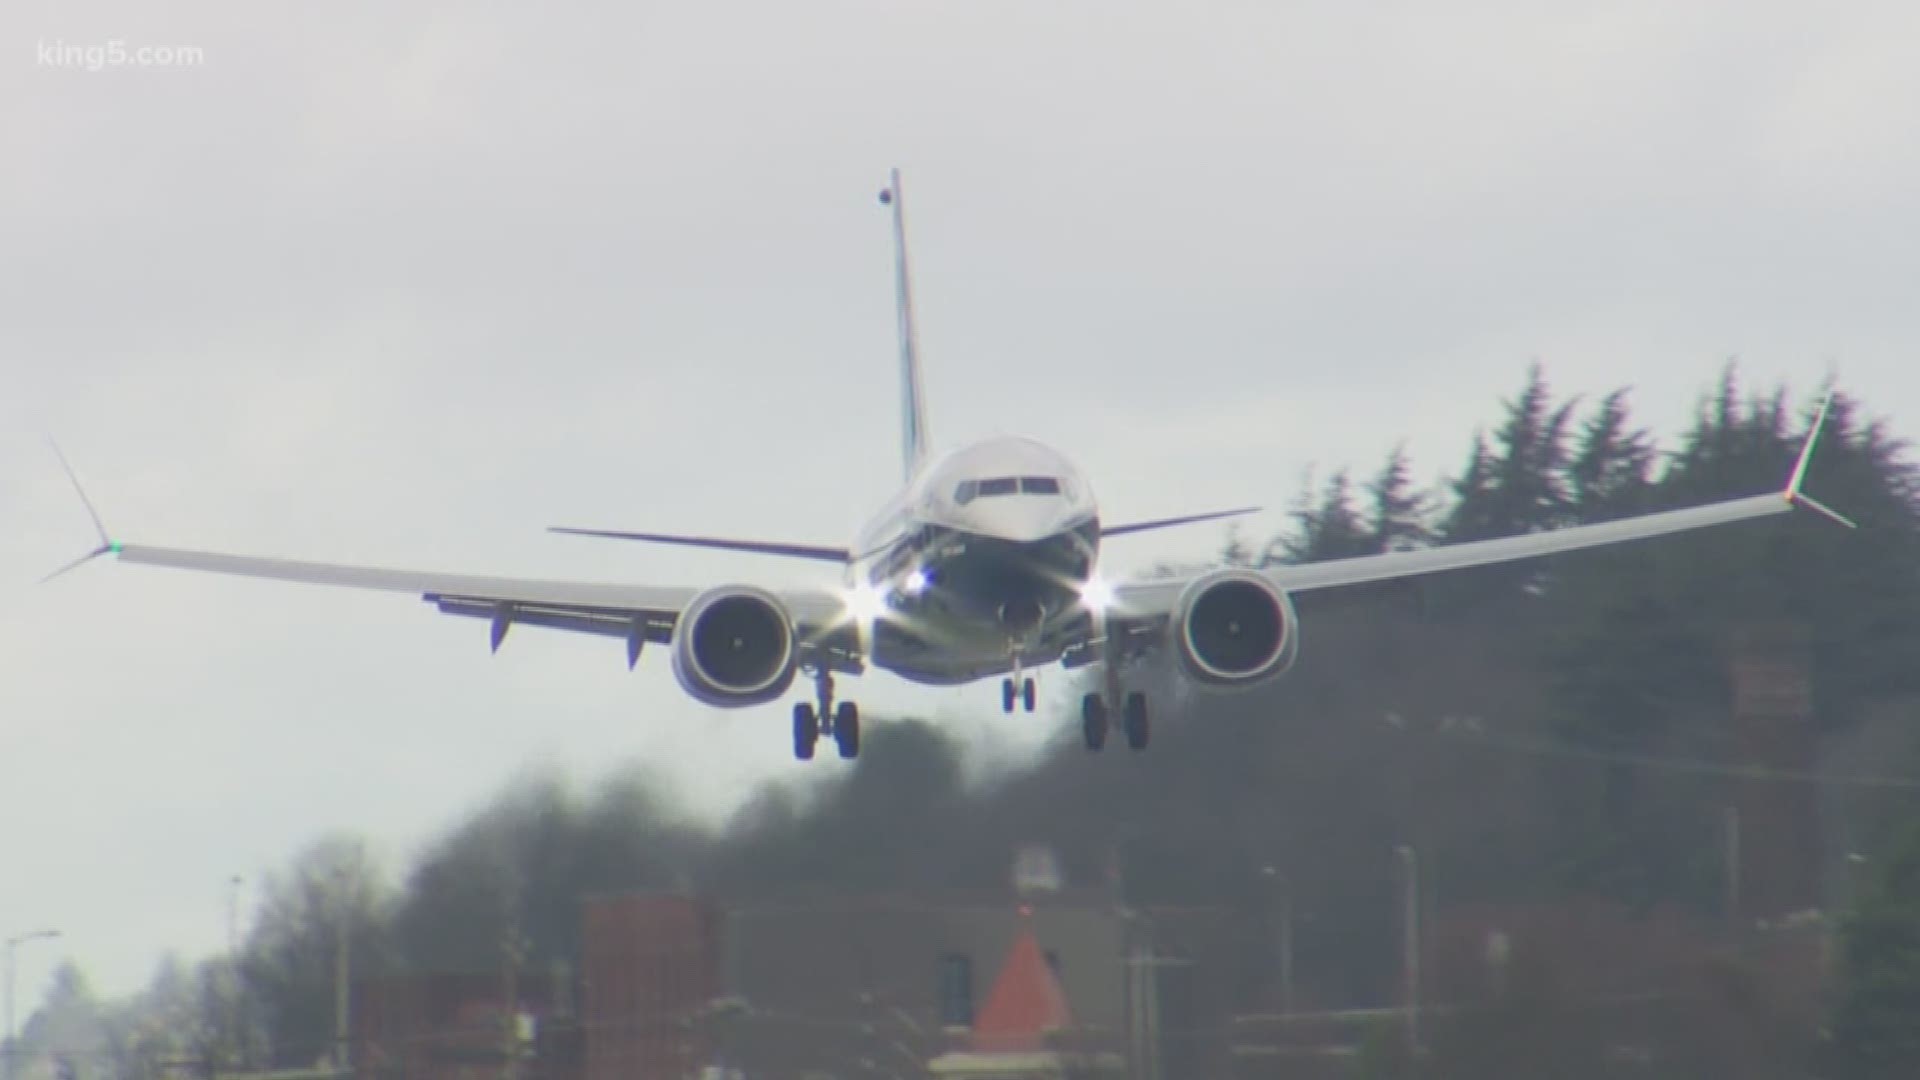 The Federal Aviation Administration confirms regulators from nine countries are meeting at an FAA facility in the Seattle area this week to look at the 737 MAX's automated flight control system and how to improve the certification of jets in the future. KING 5's Glenn Farley reports.